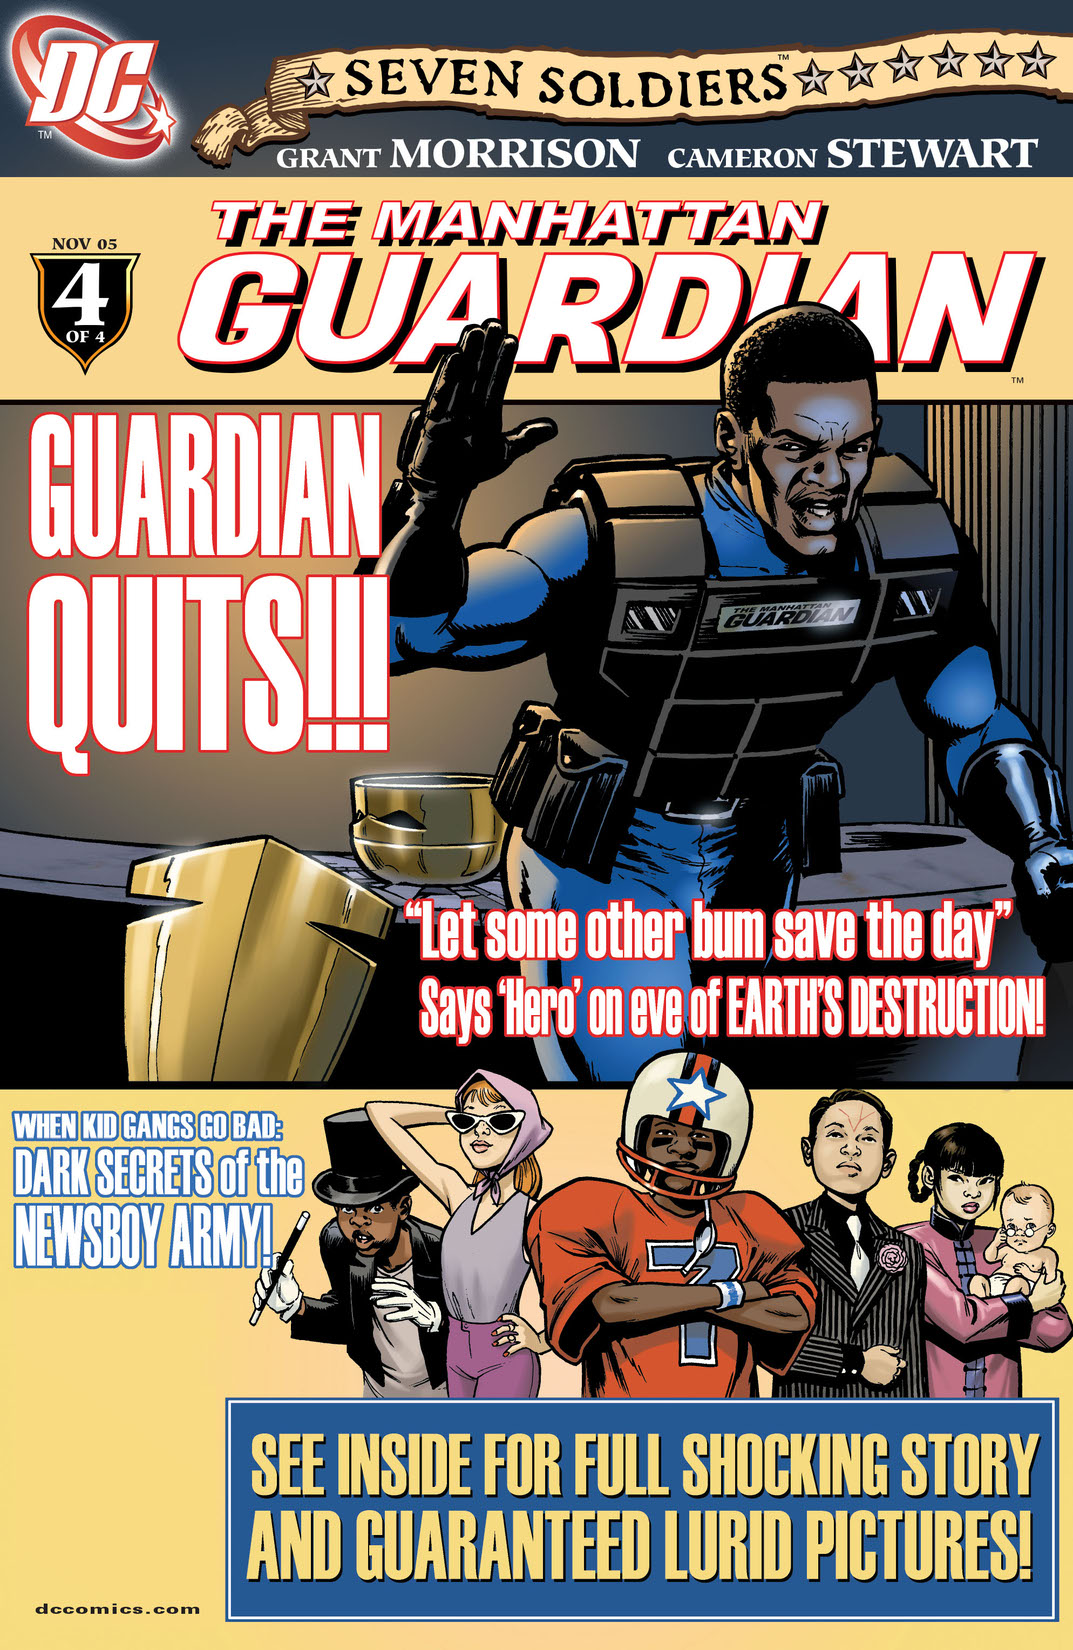 Seven Soldiers: The Manhattan Guardian #4 preview images